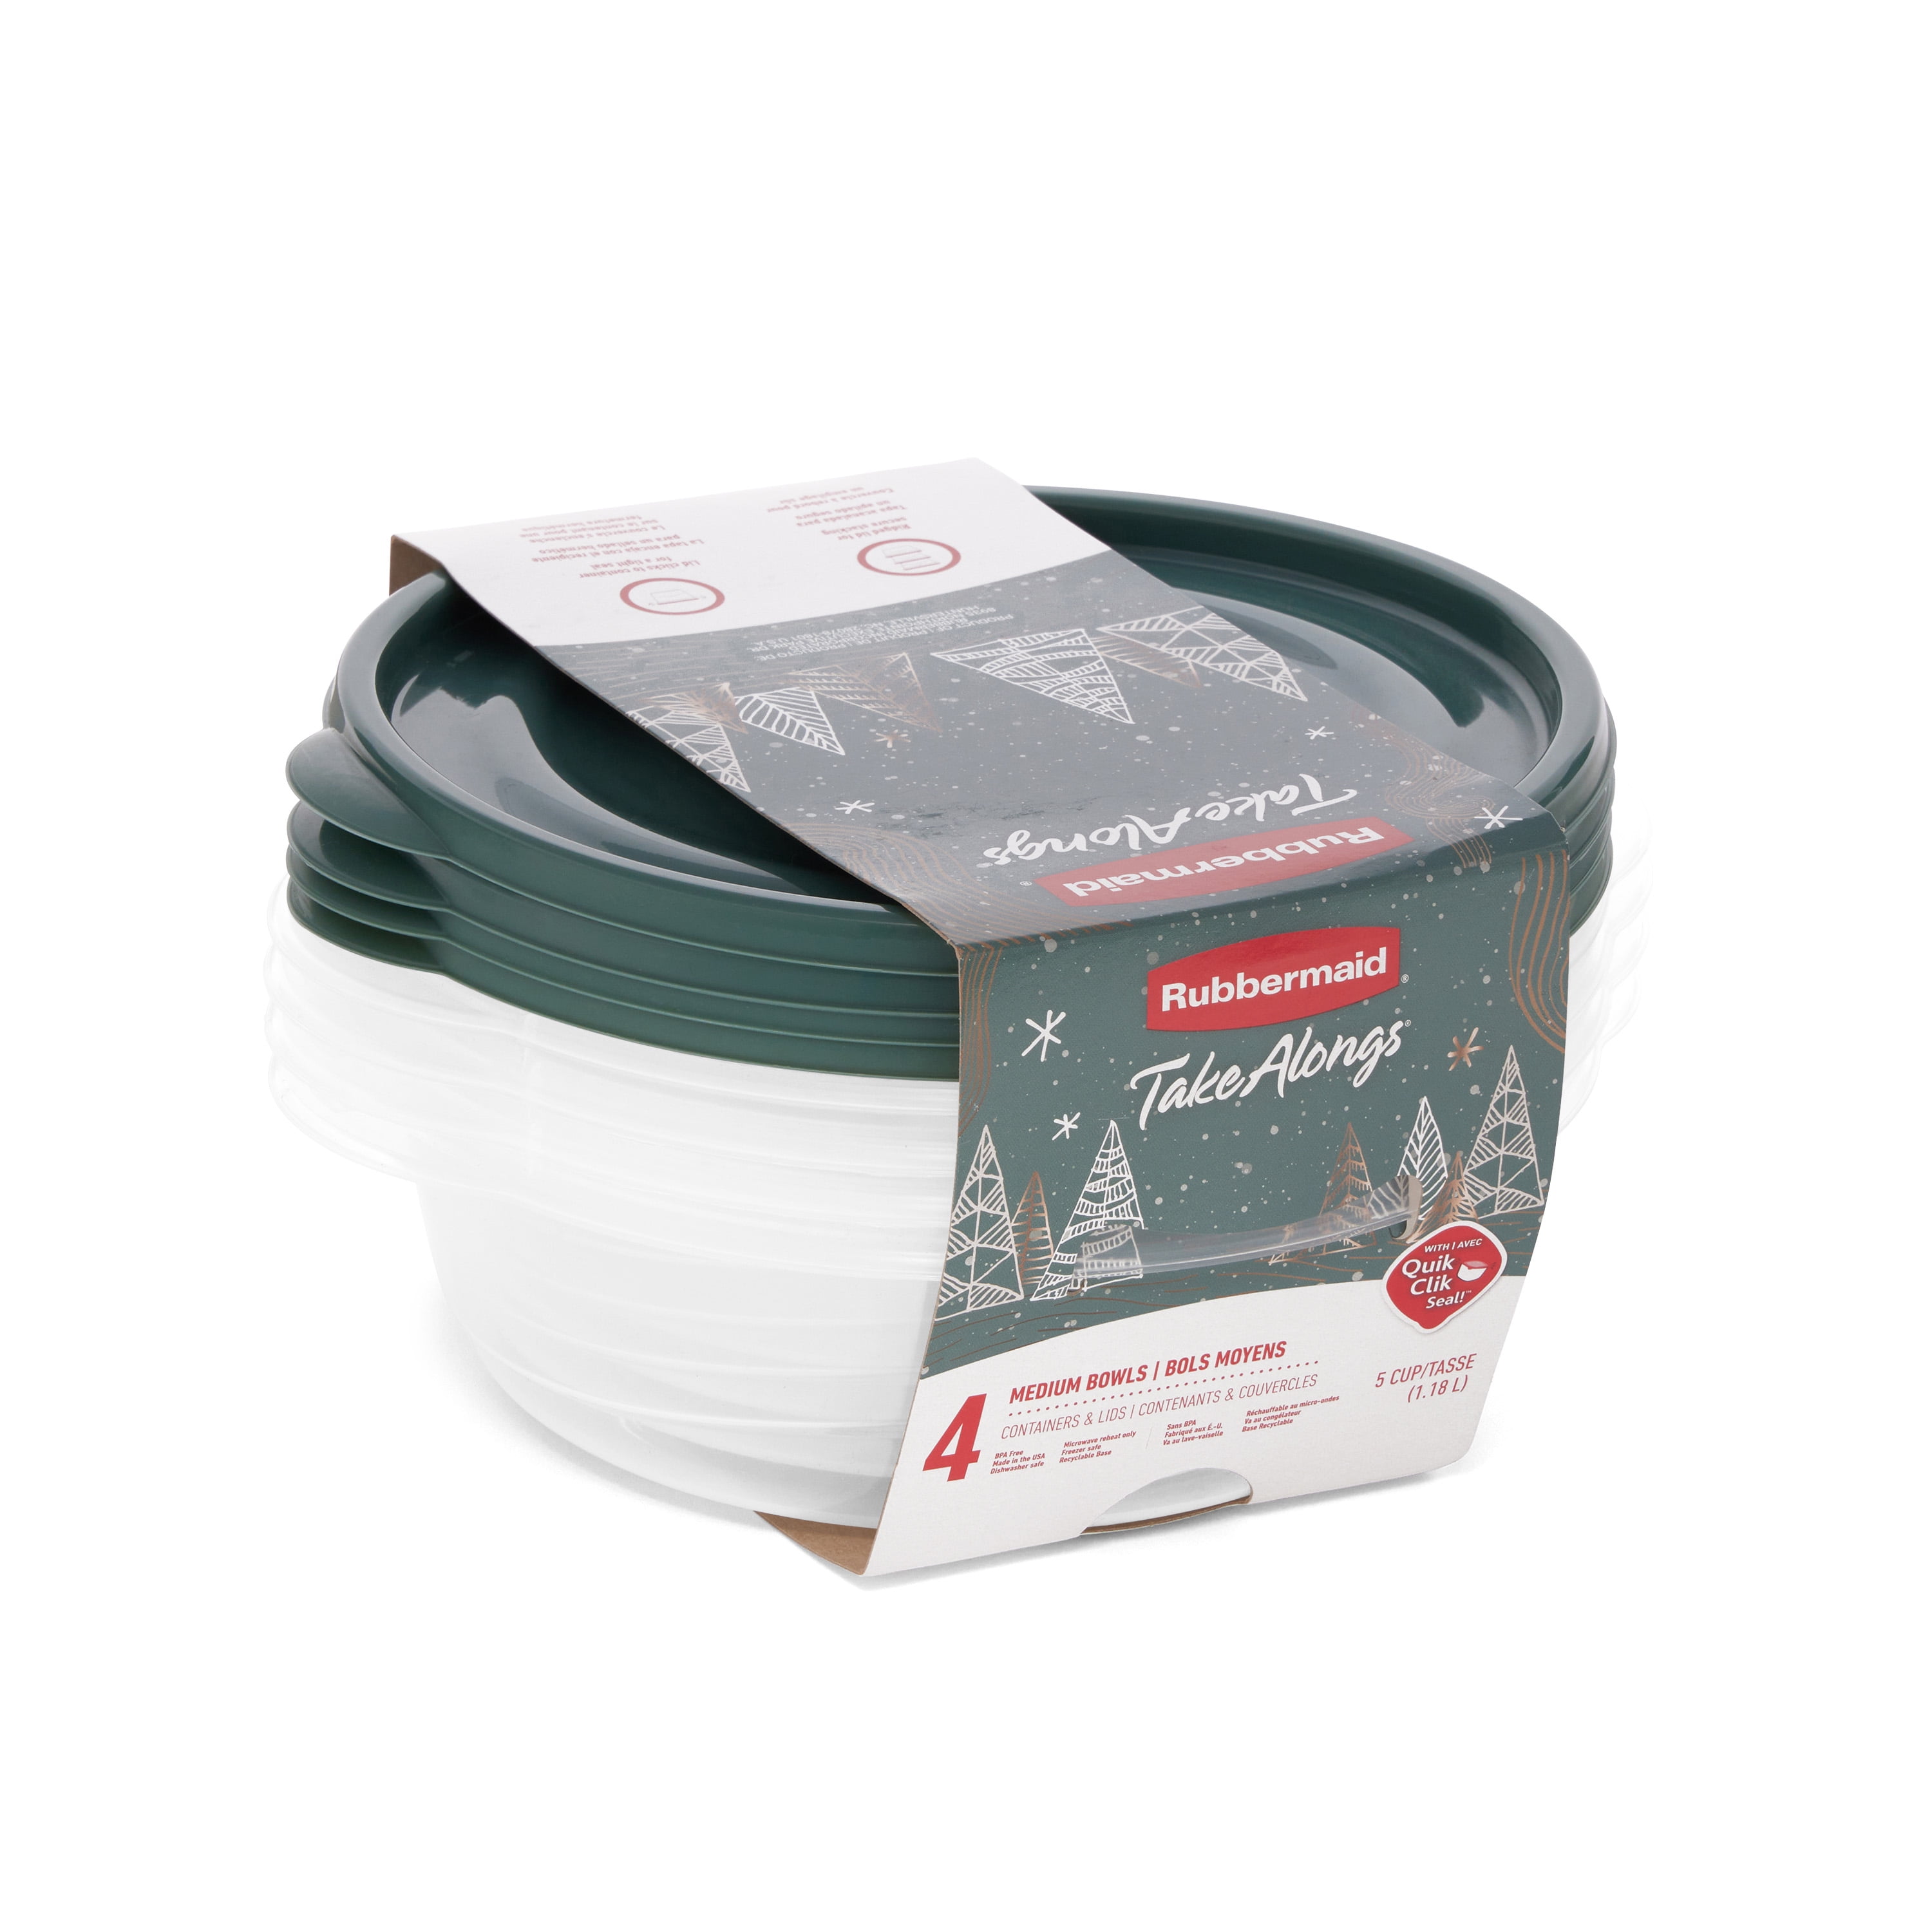 RUBBERMAID TAKEALONGS ROUND 5 CUP CONTAINERS 3 PC